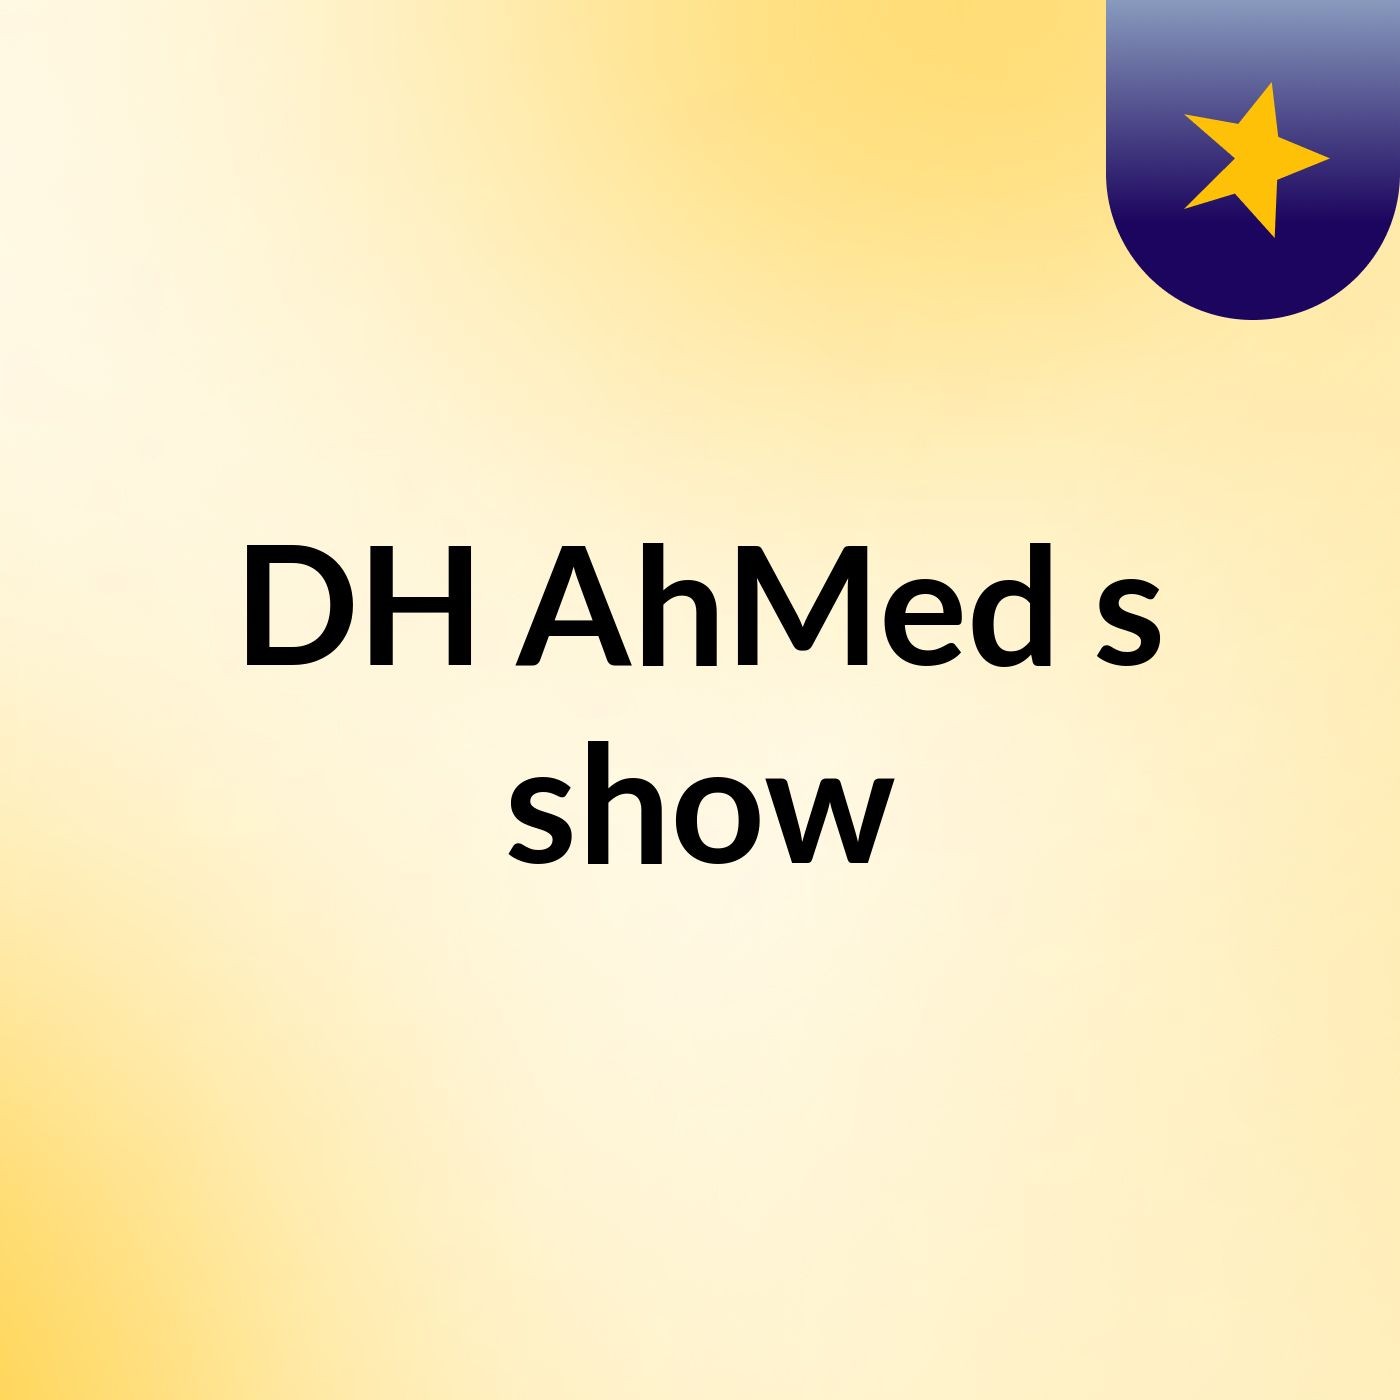 DH AhMed's show